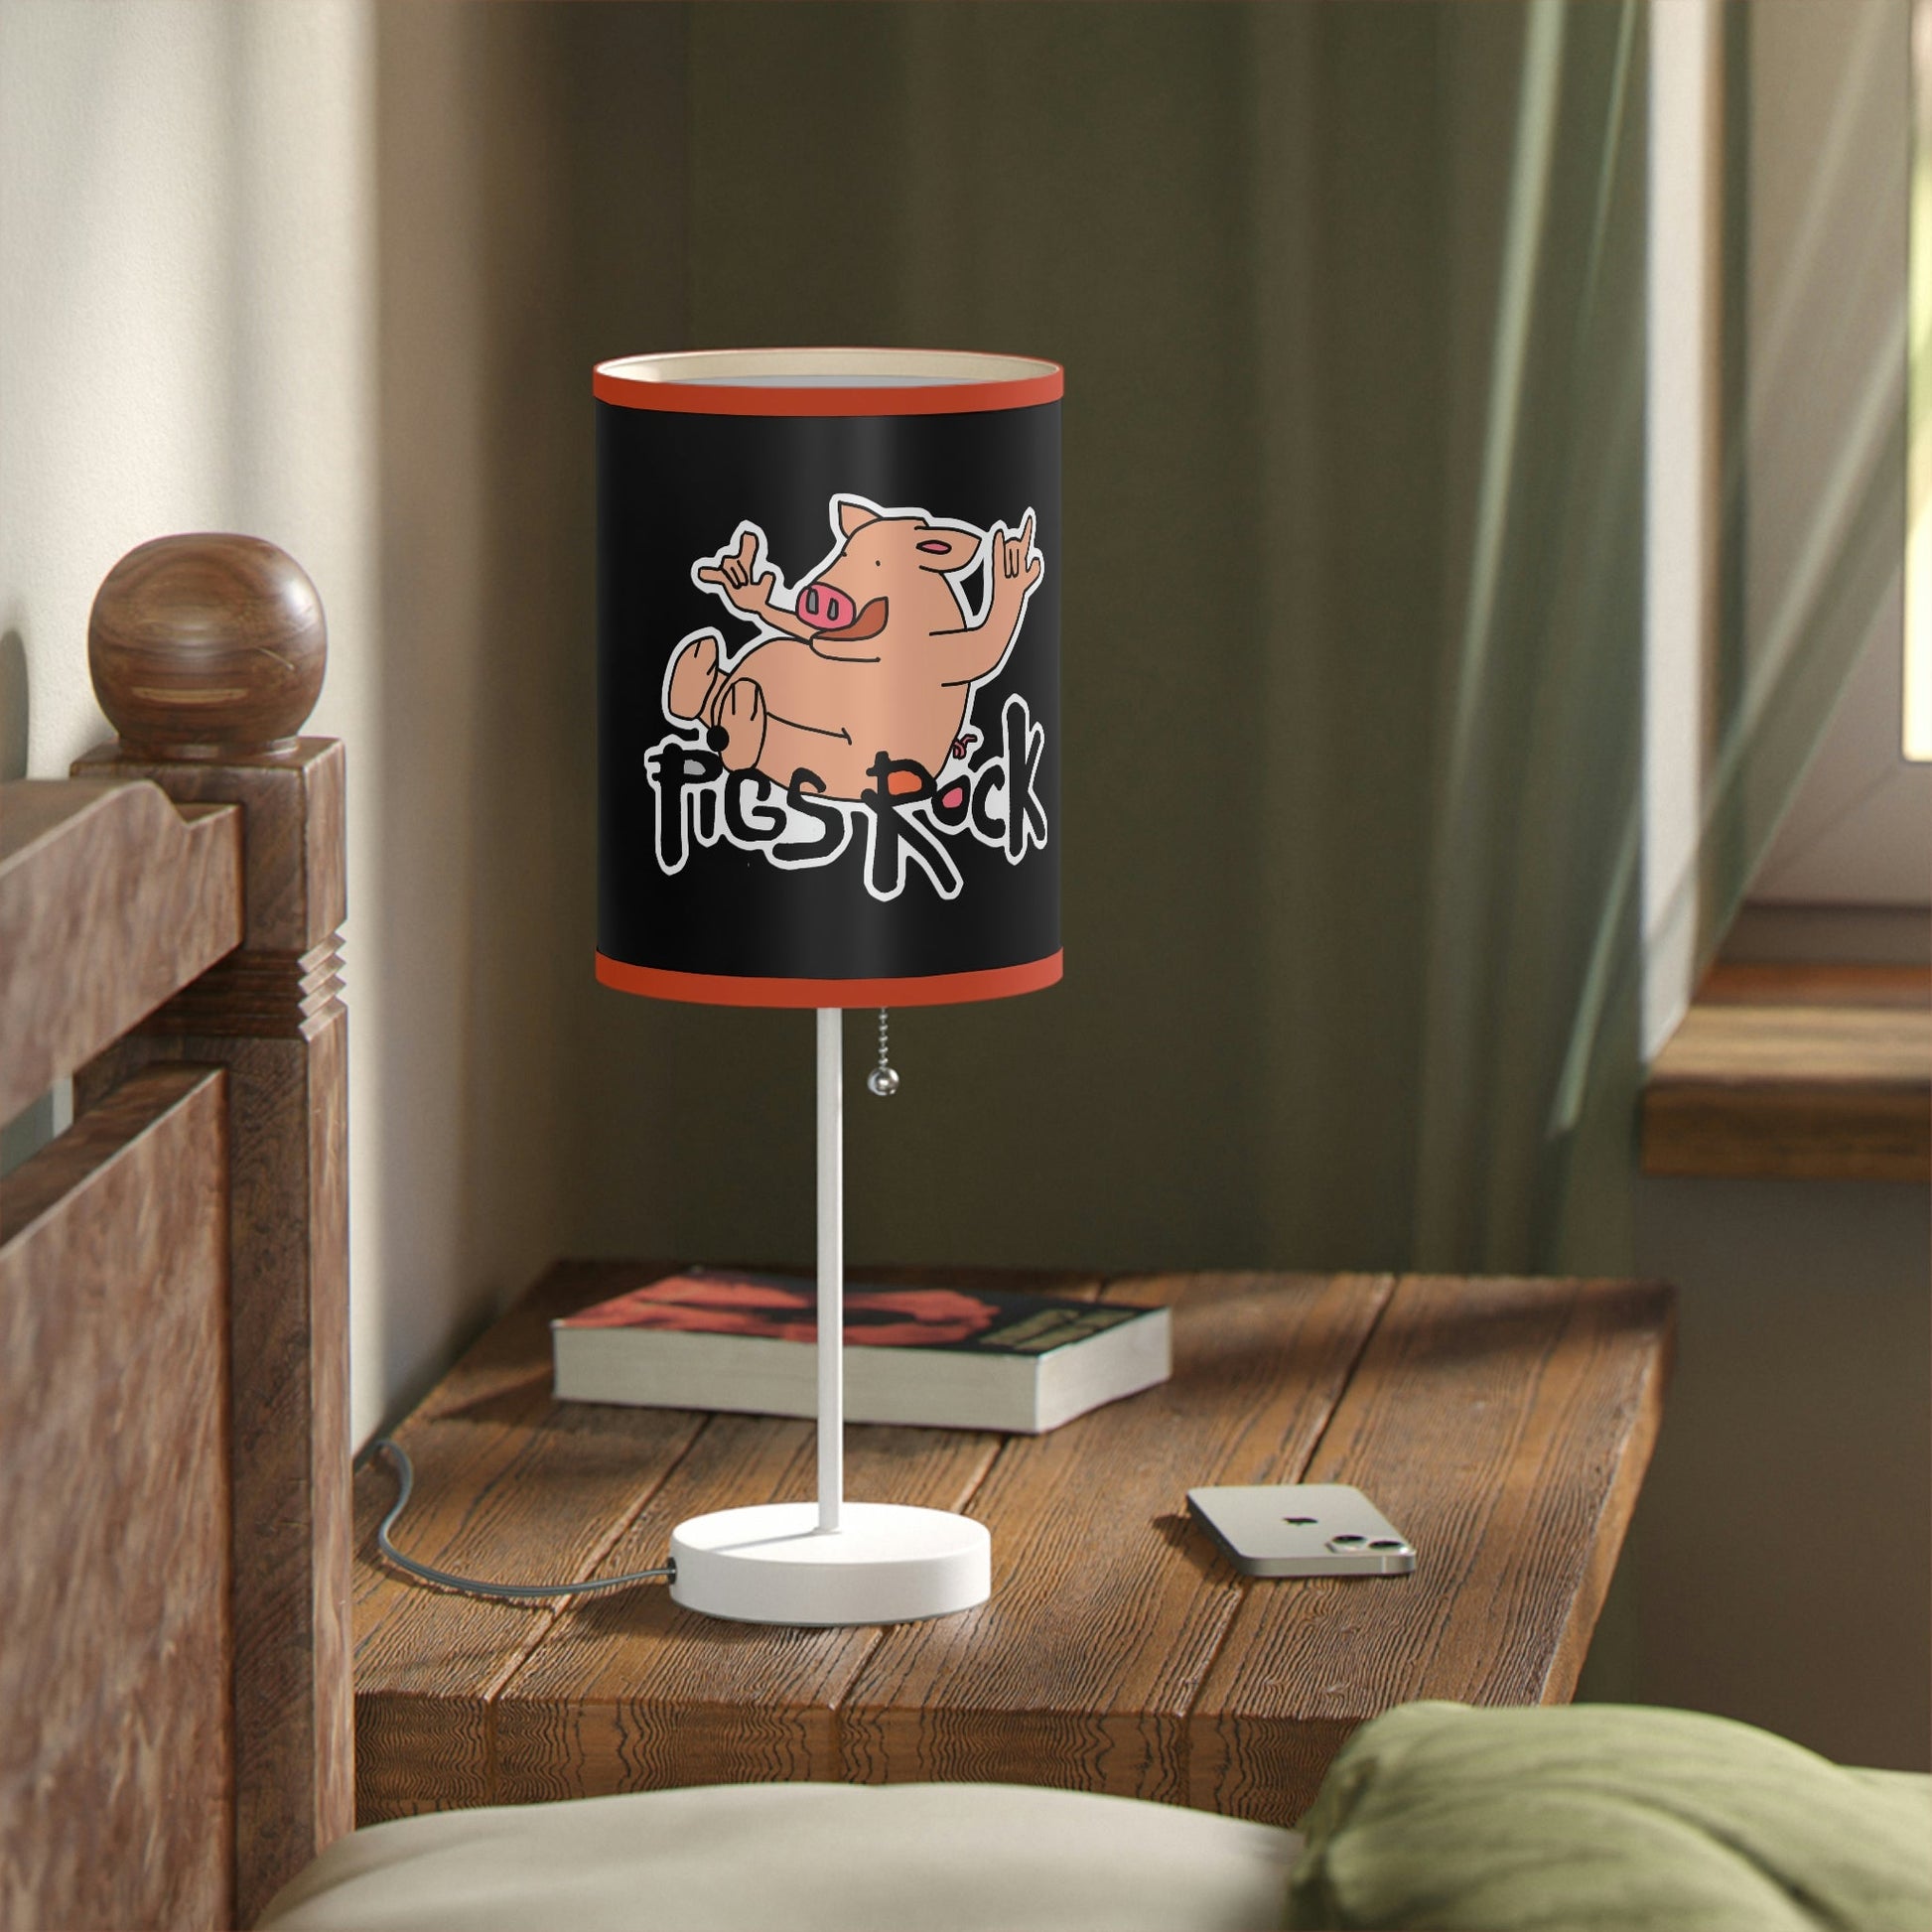 Pigs Rock! Lamp on a Stand, US|CA plug